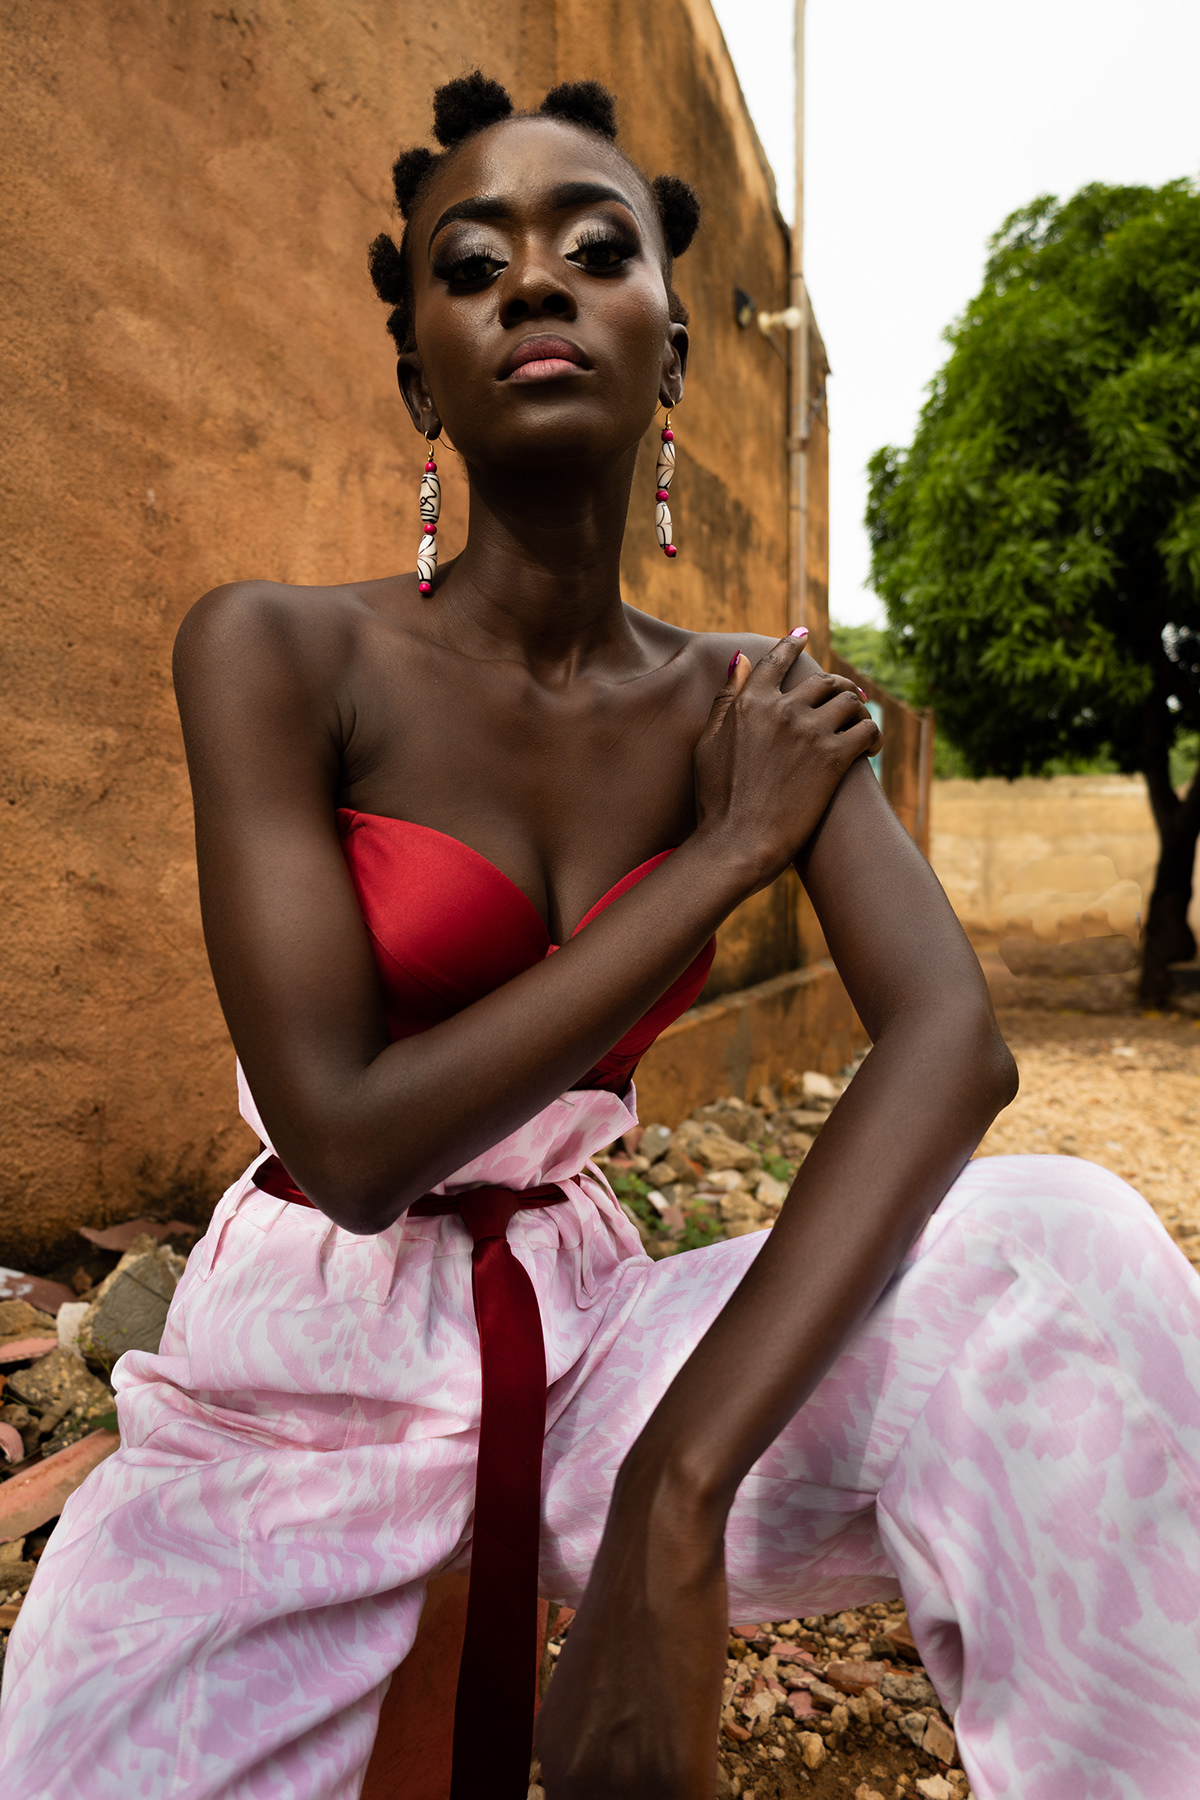 Octobre-Rose-2022-Talented-Marina-Boucal-International-Model-from-Senegal -Picture-by-Khaled-Fhemy-Mamah-Design-carefully-crafted-by-Romzy-Studio-DN-AFRICA-Media-Partner